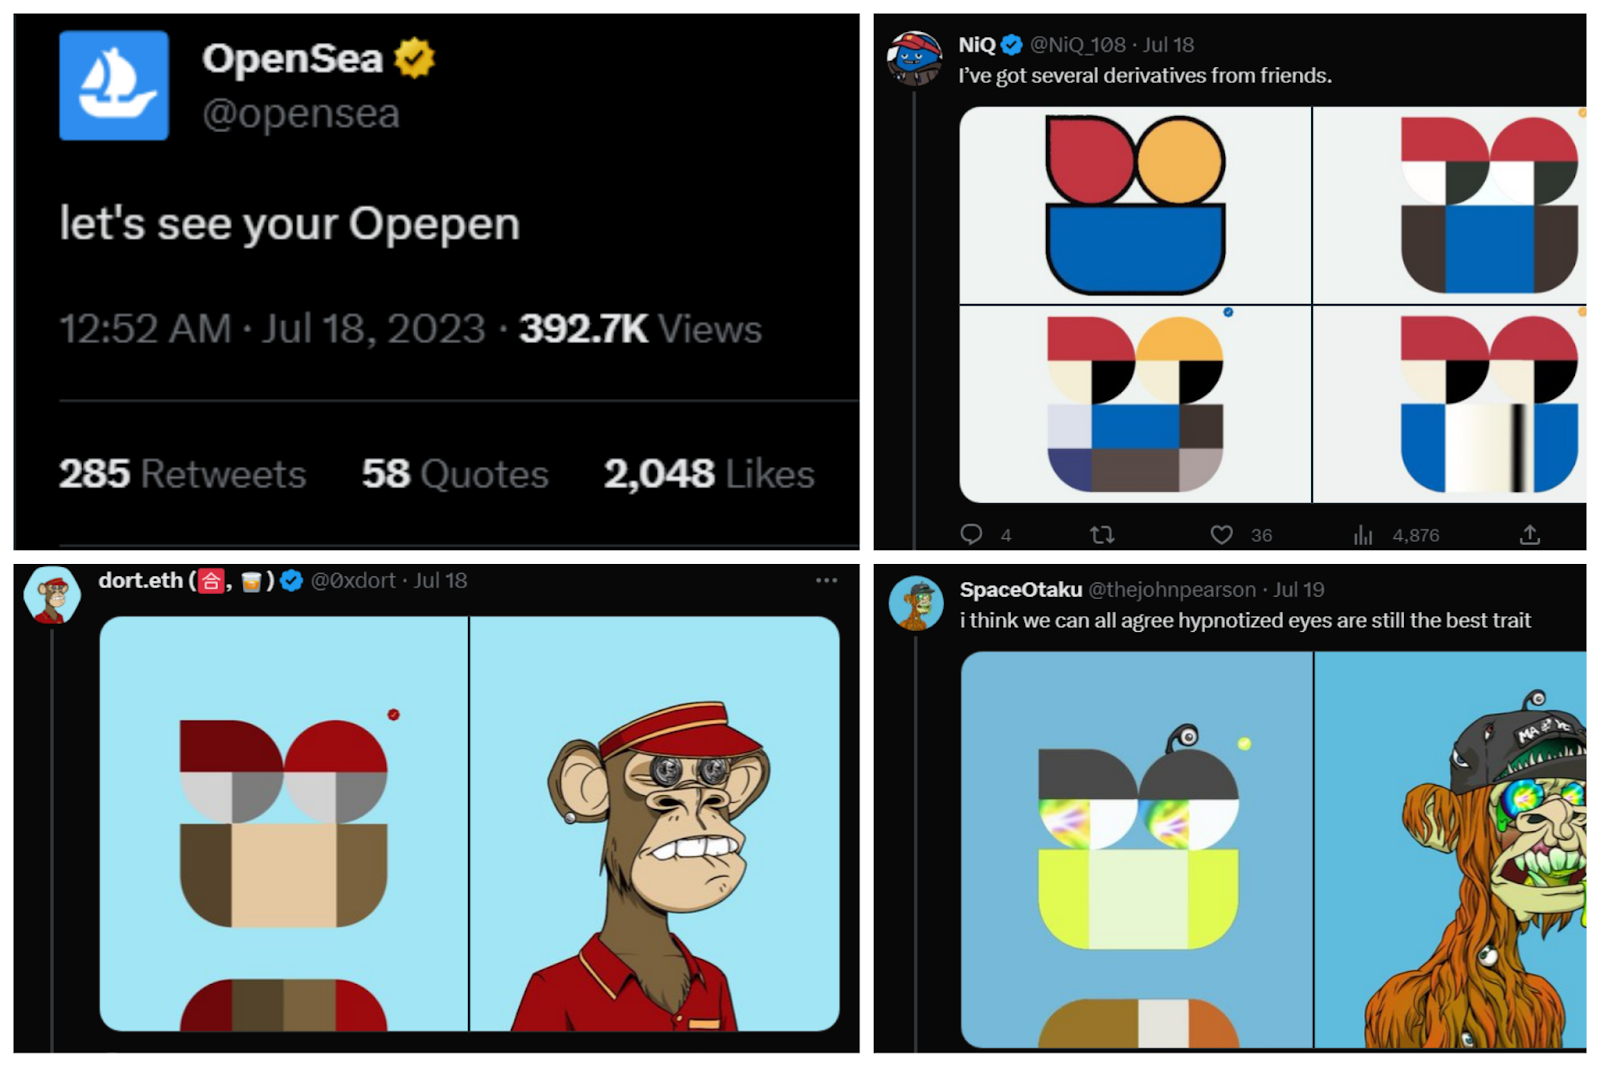 An image of a collage of tweets showing OpenSea’s tweet and its responses. 